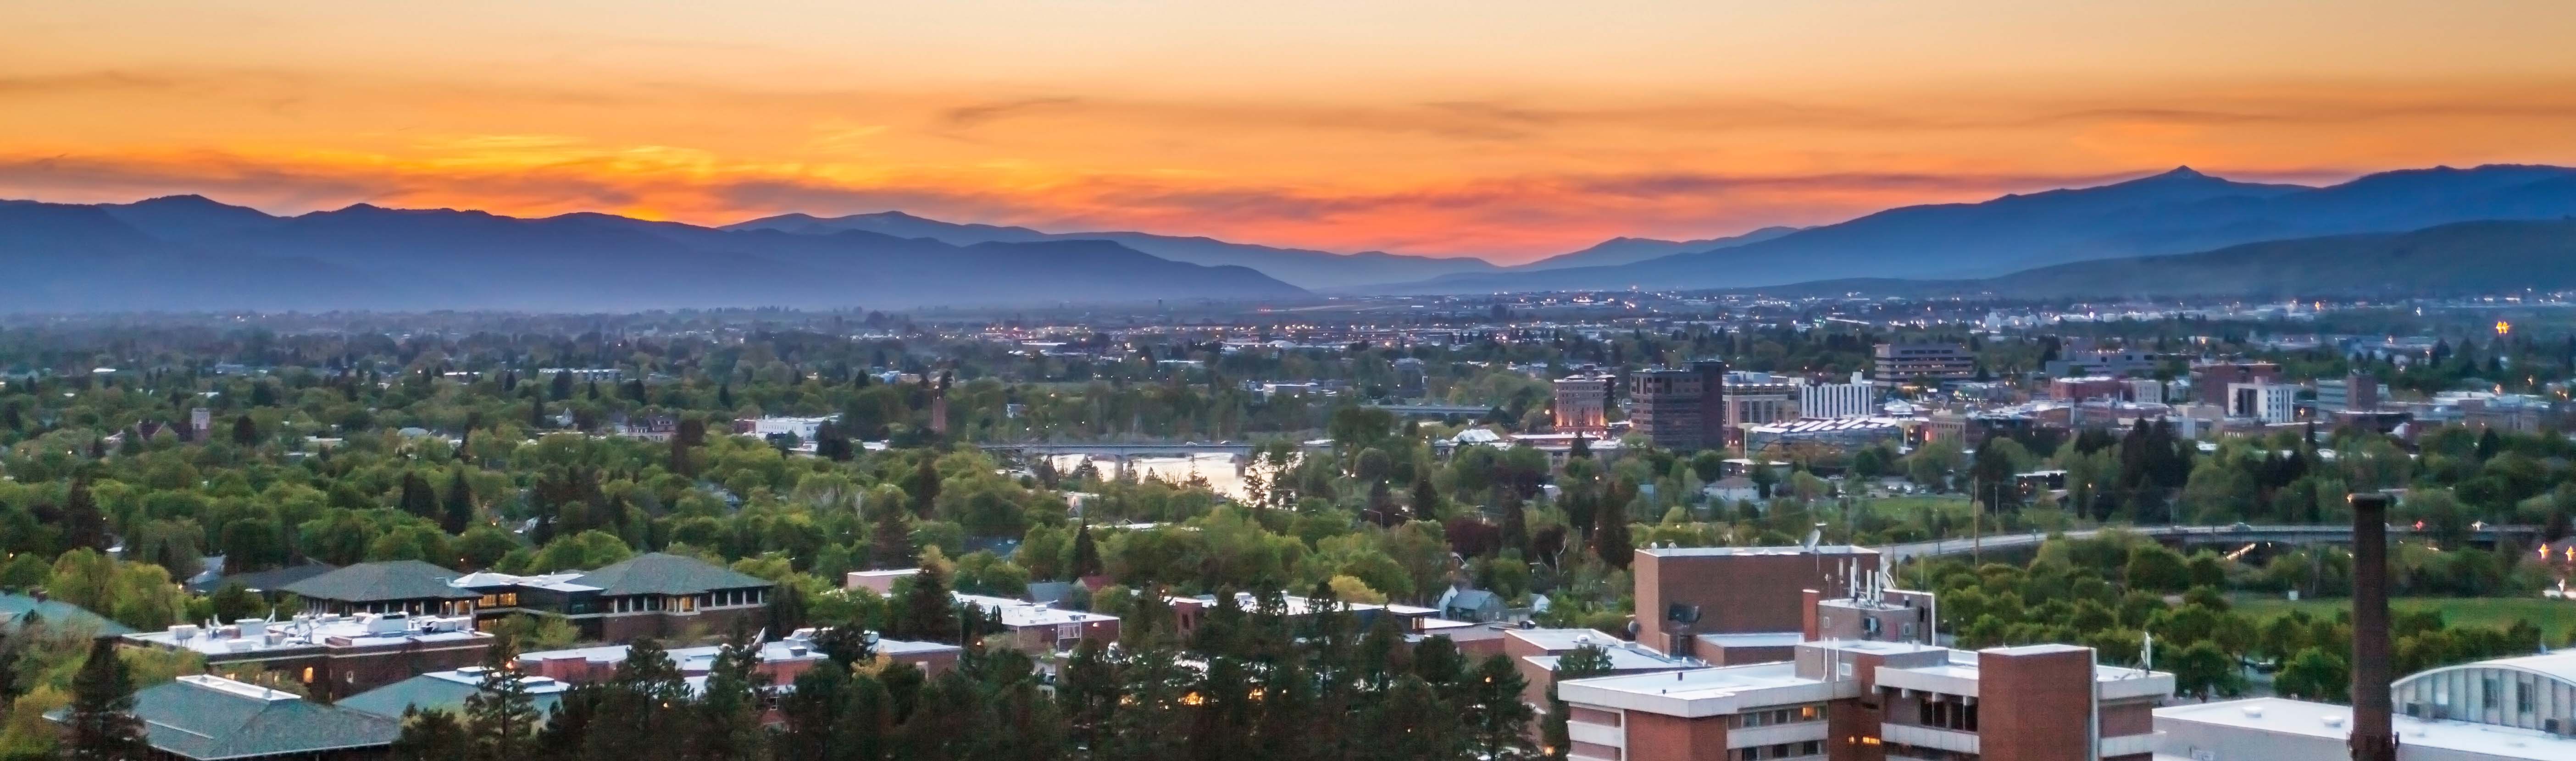 12 Things We Are Excited For in Missoula This Spring